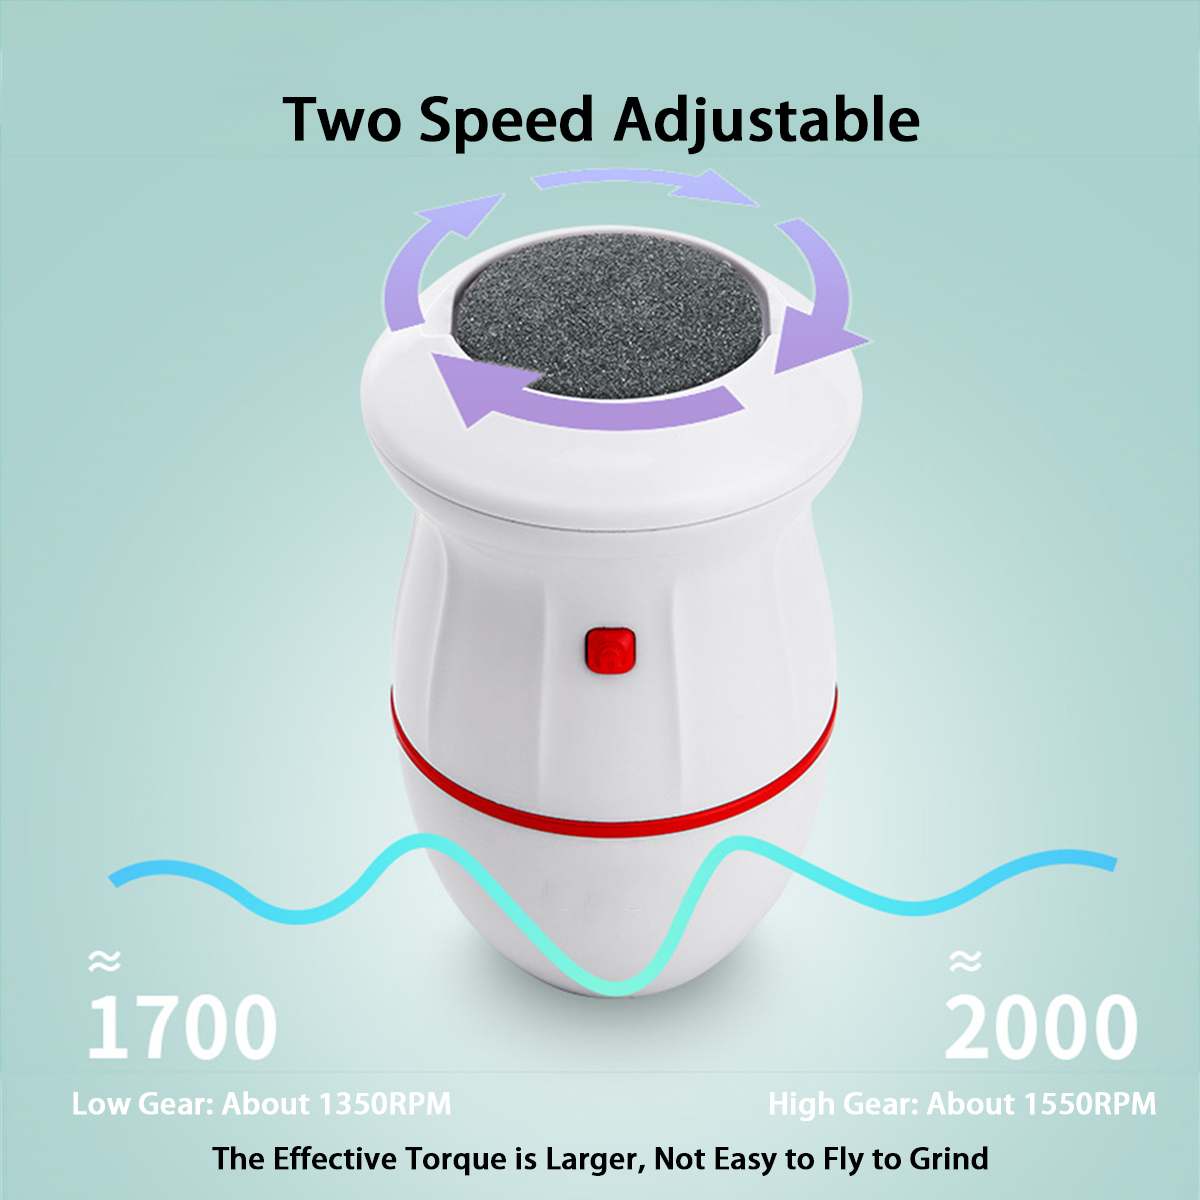 Portable Electric Vacuum Adsorption Foot Grinder Electronic Foot File Pedicure Tools Callus Remover Feet Care Sander with 2 Head